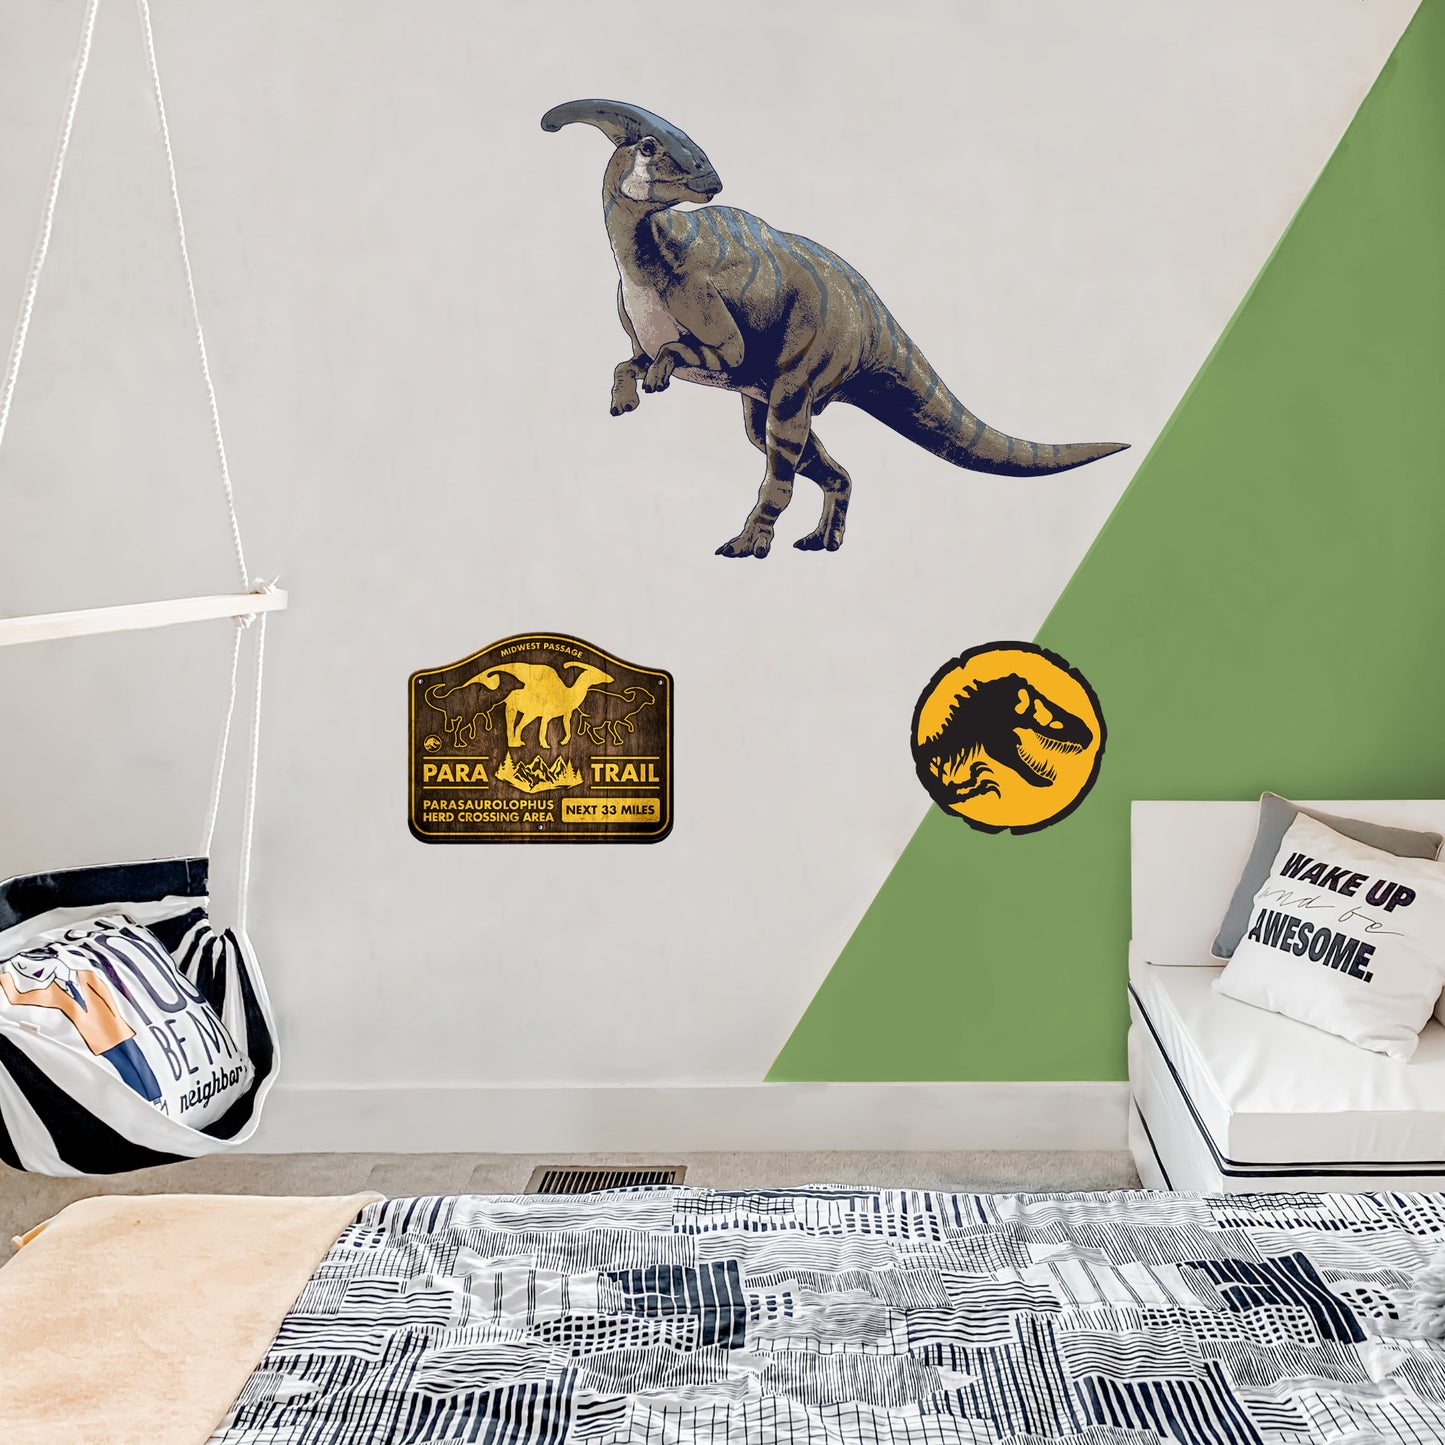 Jurassic World Dominion: Parasaurolophus RealBig - Officially Licensed NBC Universal Removable Adhesive Decal